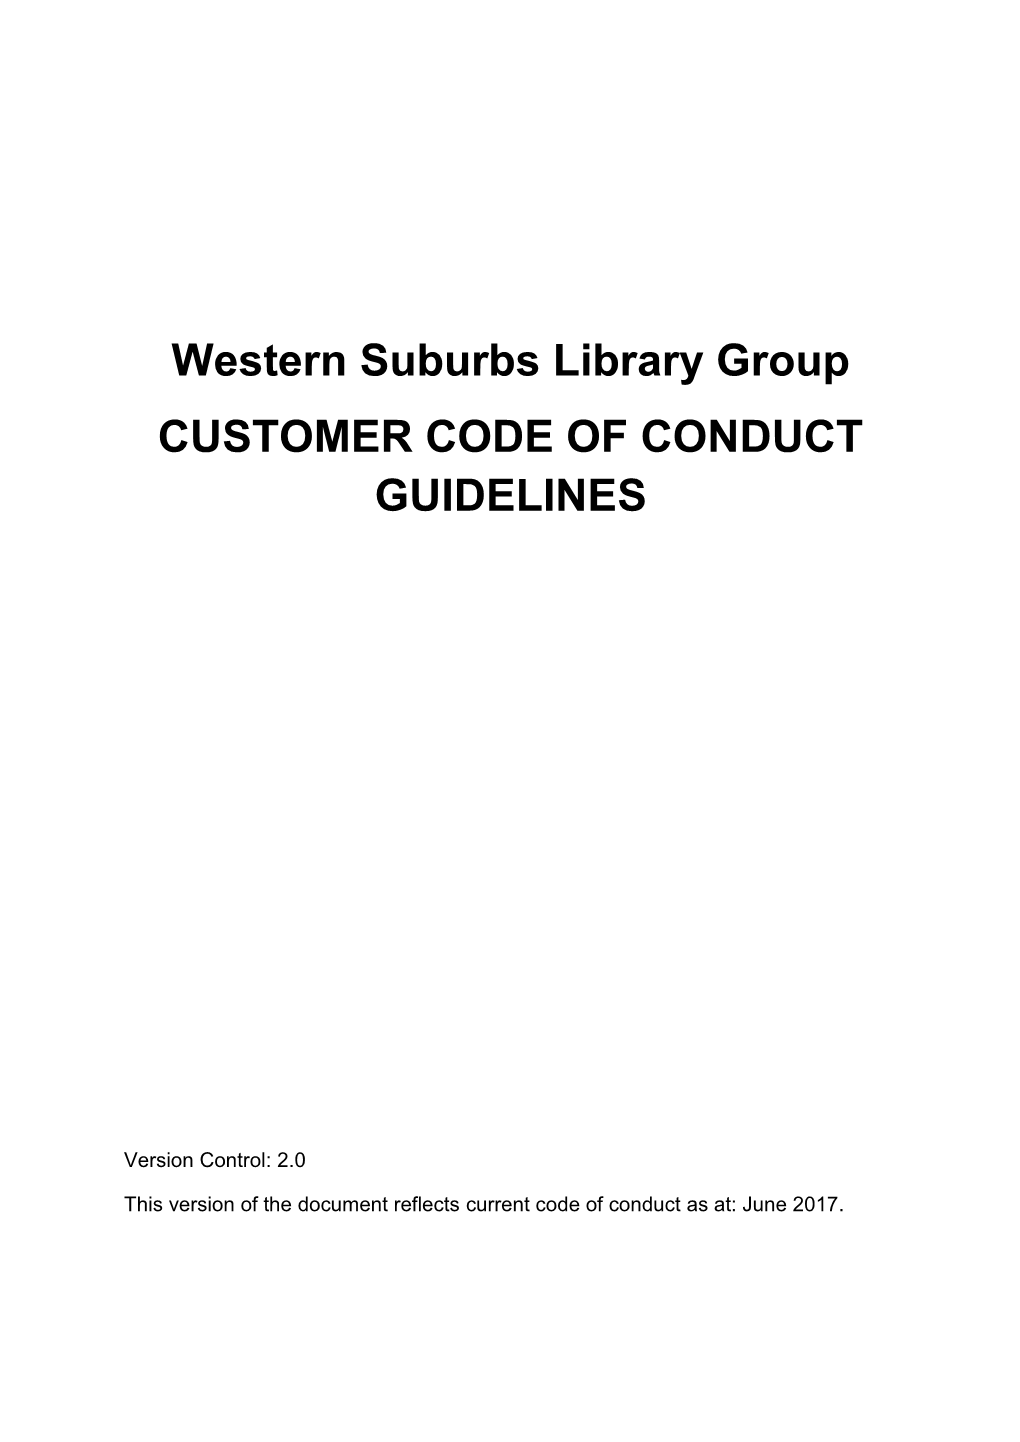 Western Suburbs Library Group CUSTOMER CODE of CONDUCT GUIDELINES